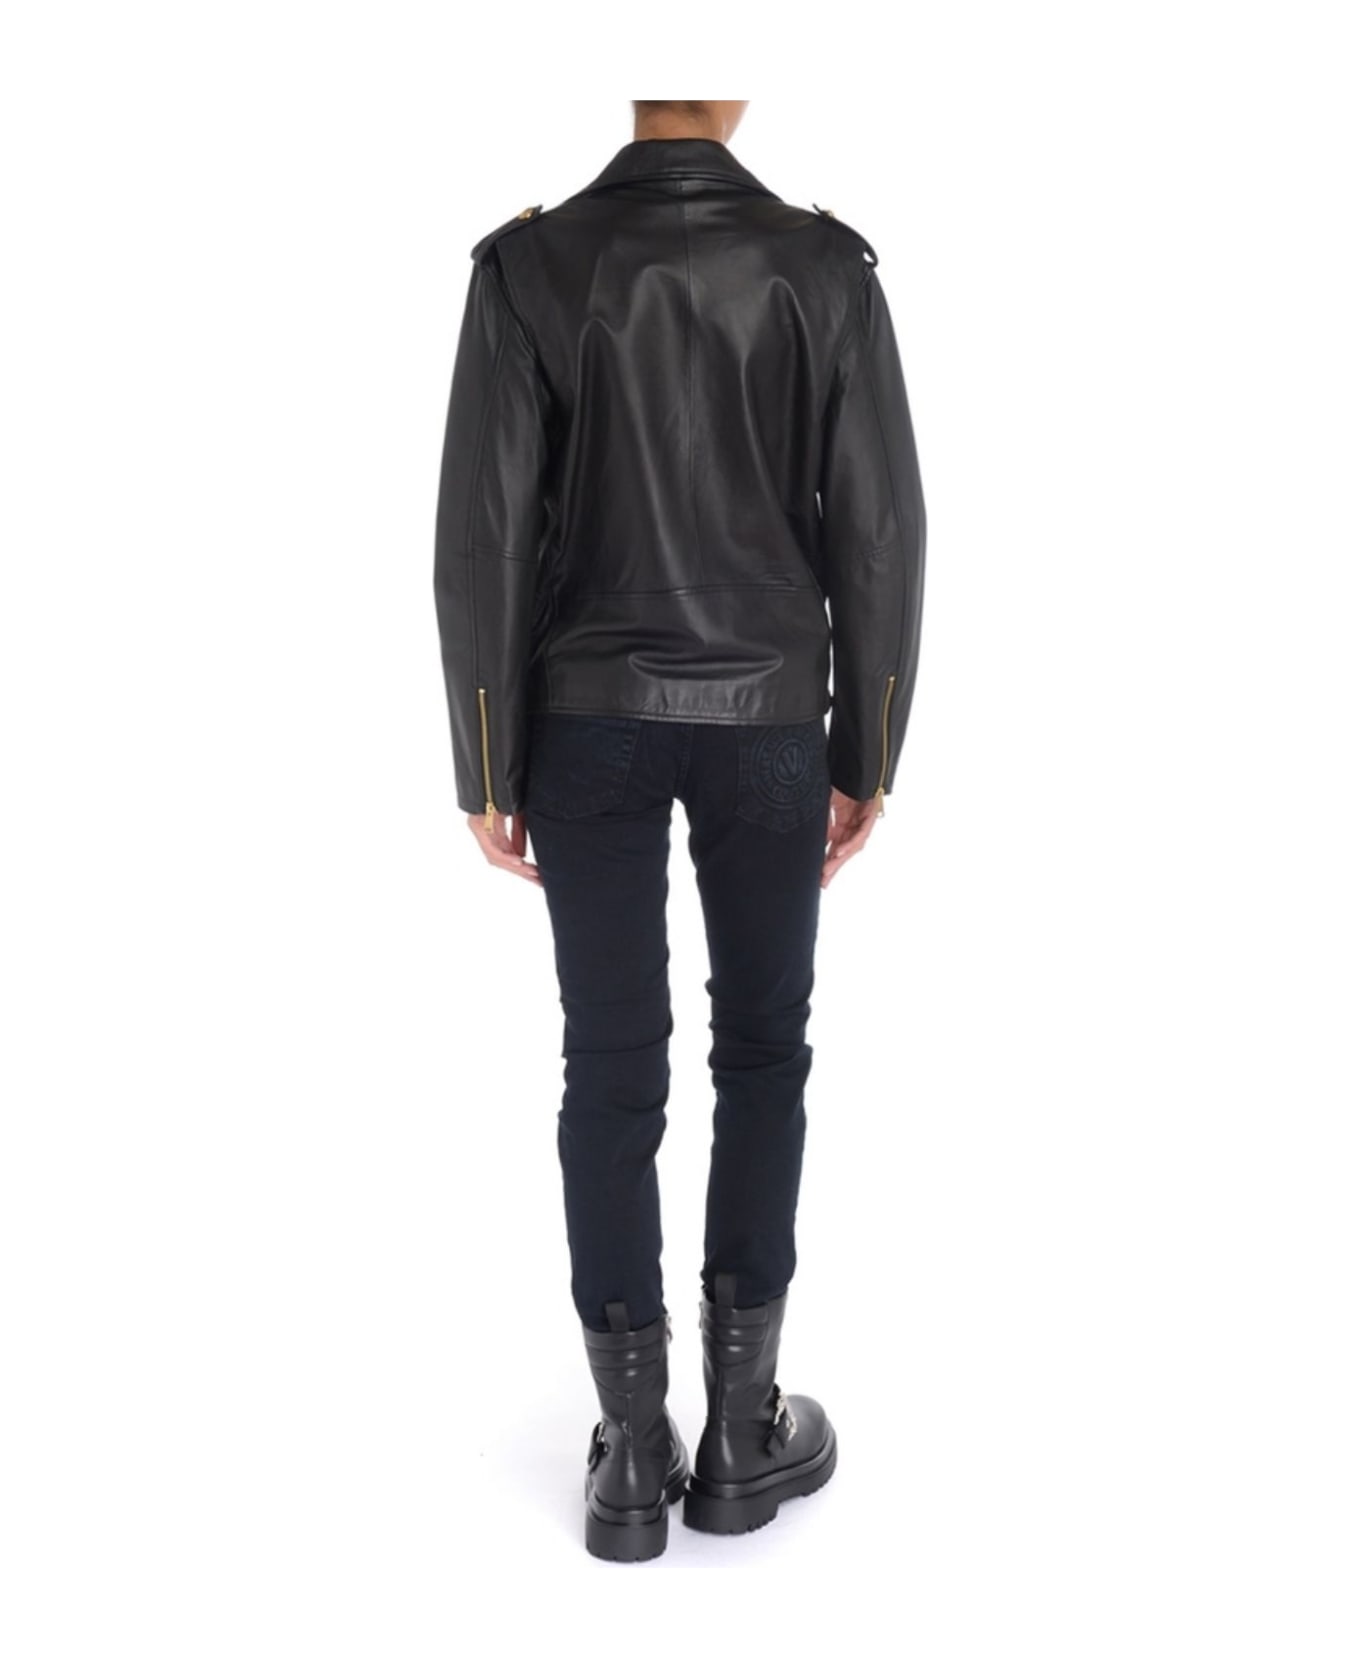 Versace Jeans Couture Leather Jacket - Black